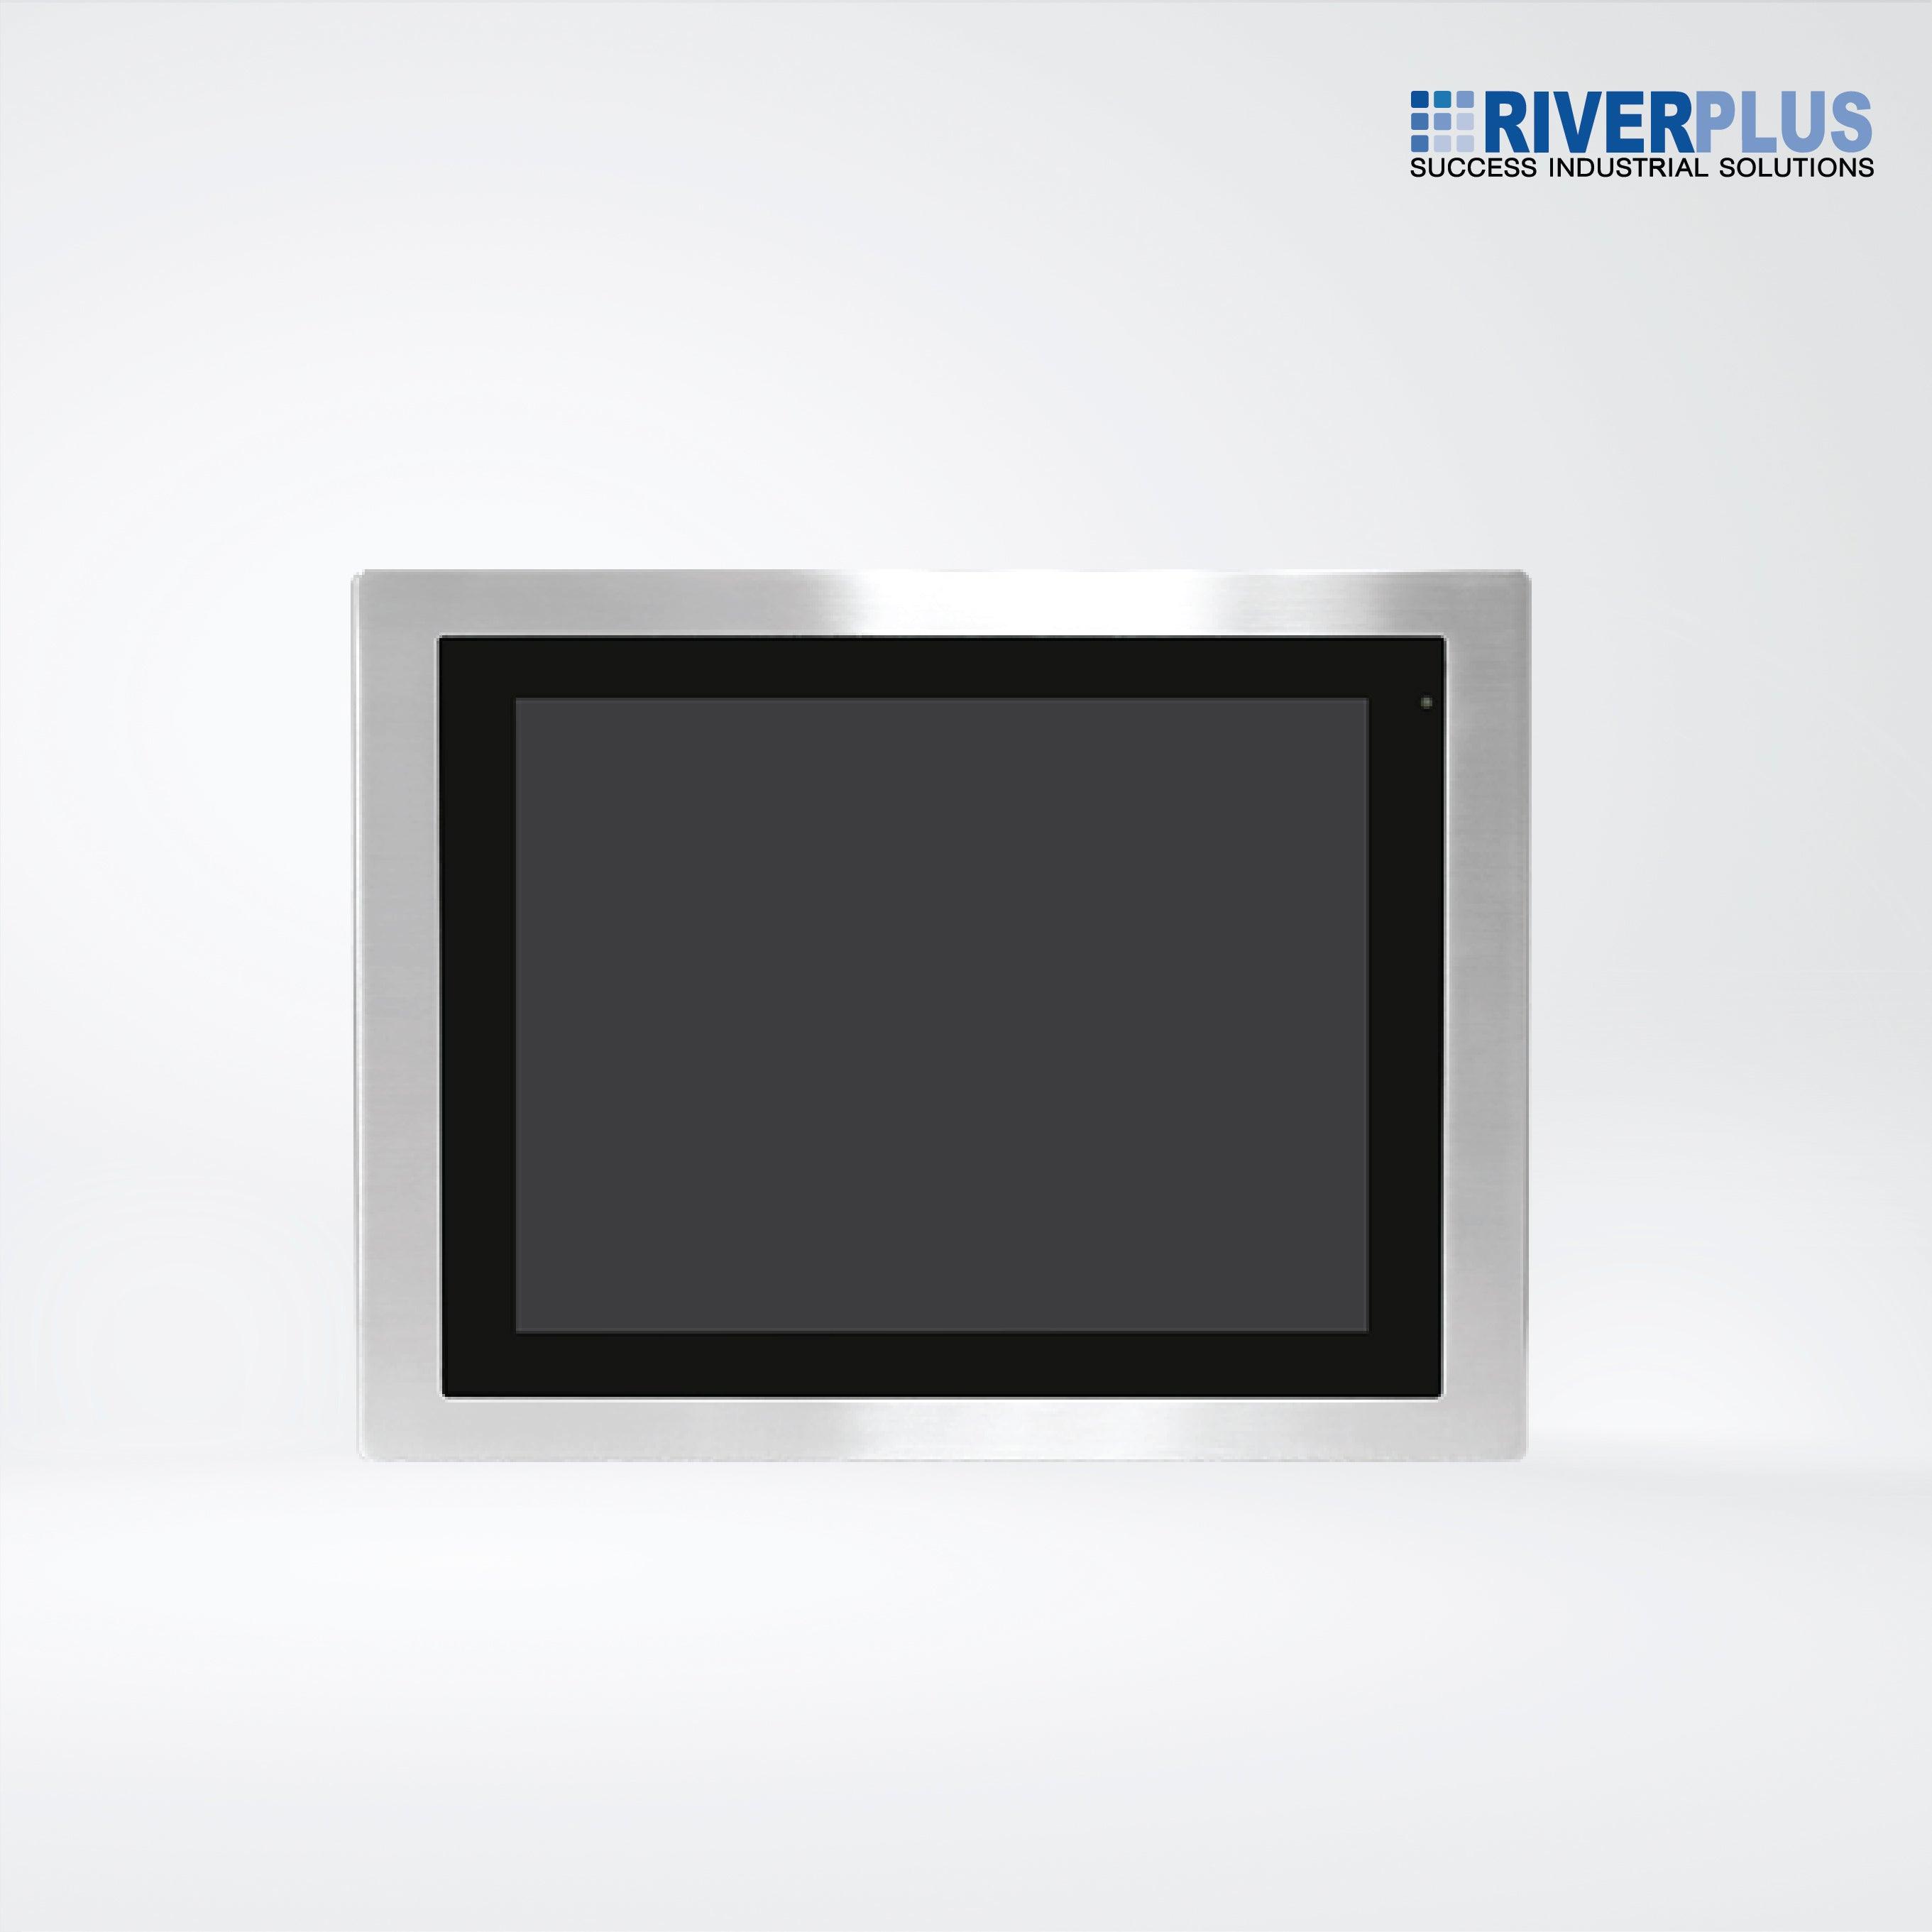 FABS-115RH 15” Flat Front Panel IP66 Stainless Chassis Display - Riverplus